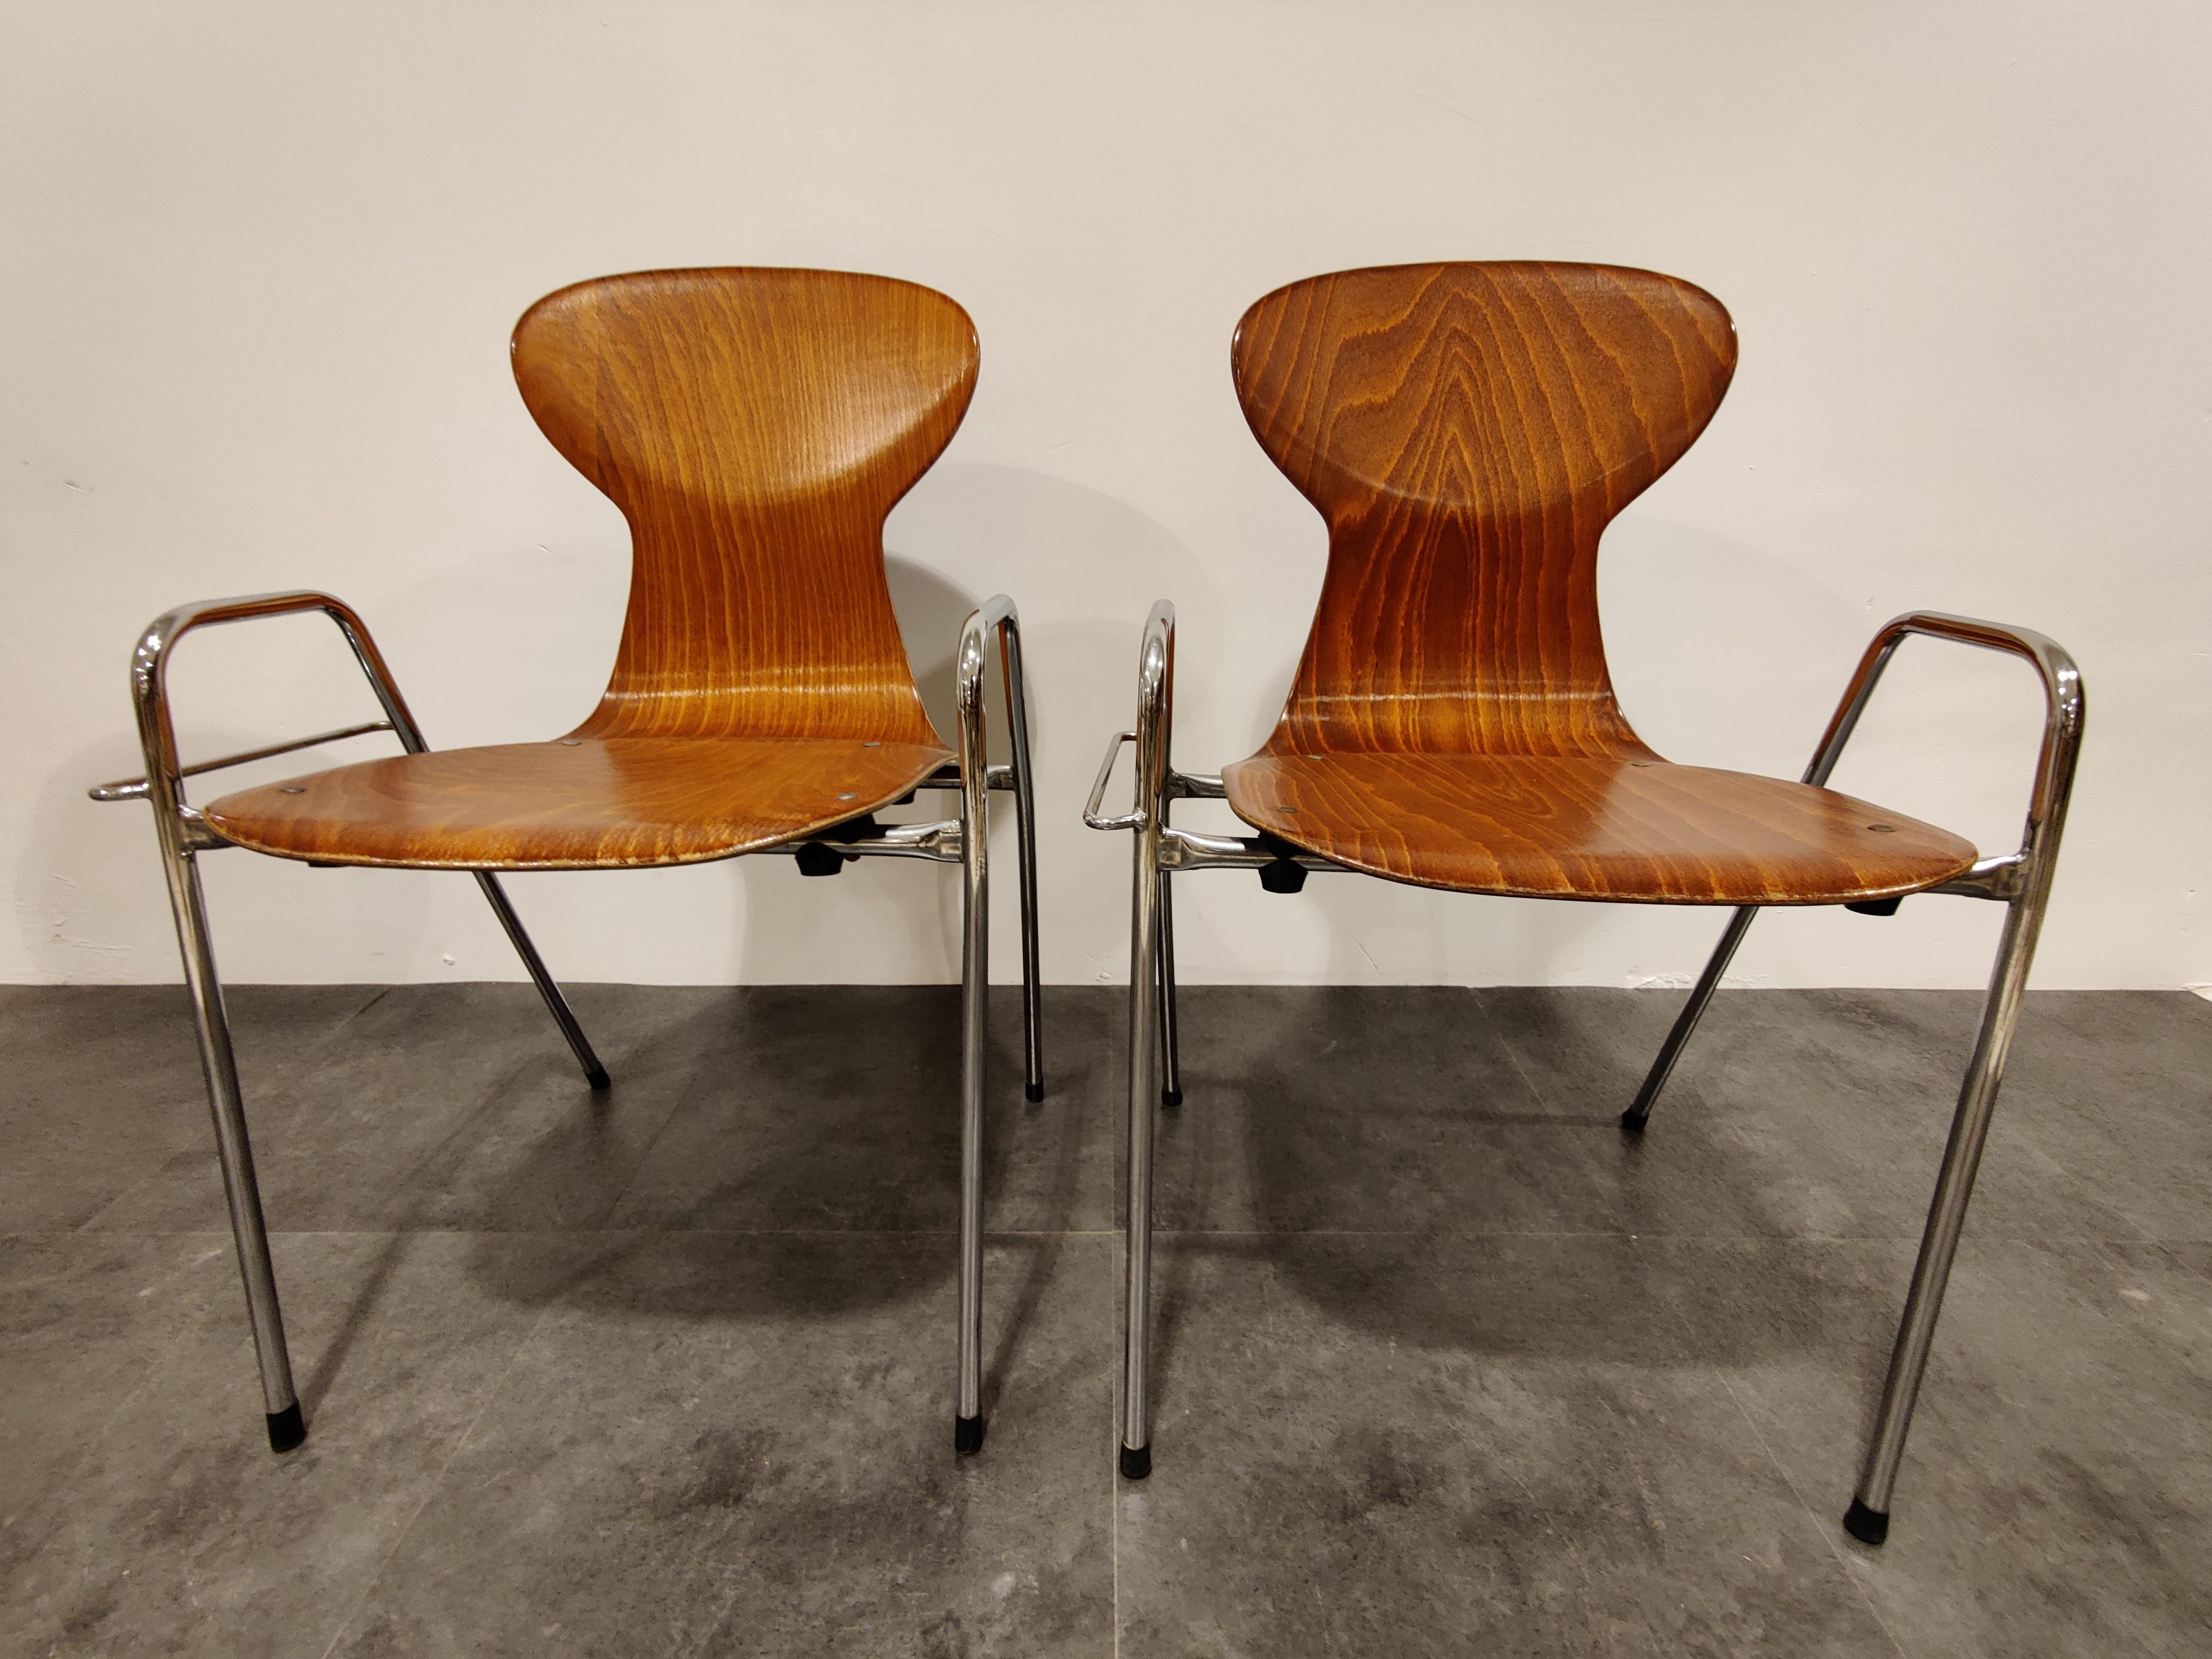 Industrial Vintage Plywood Chairs by Tubax, Belgium, Set of 8, 1980s